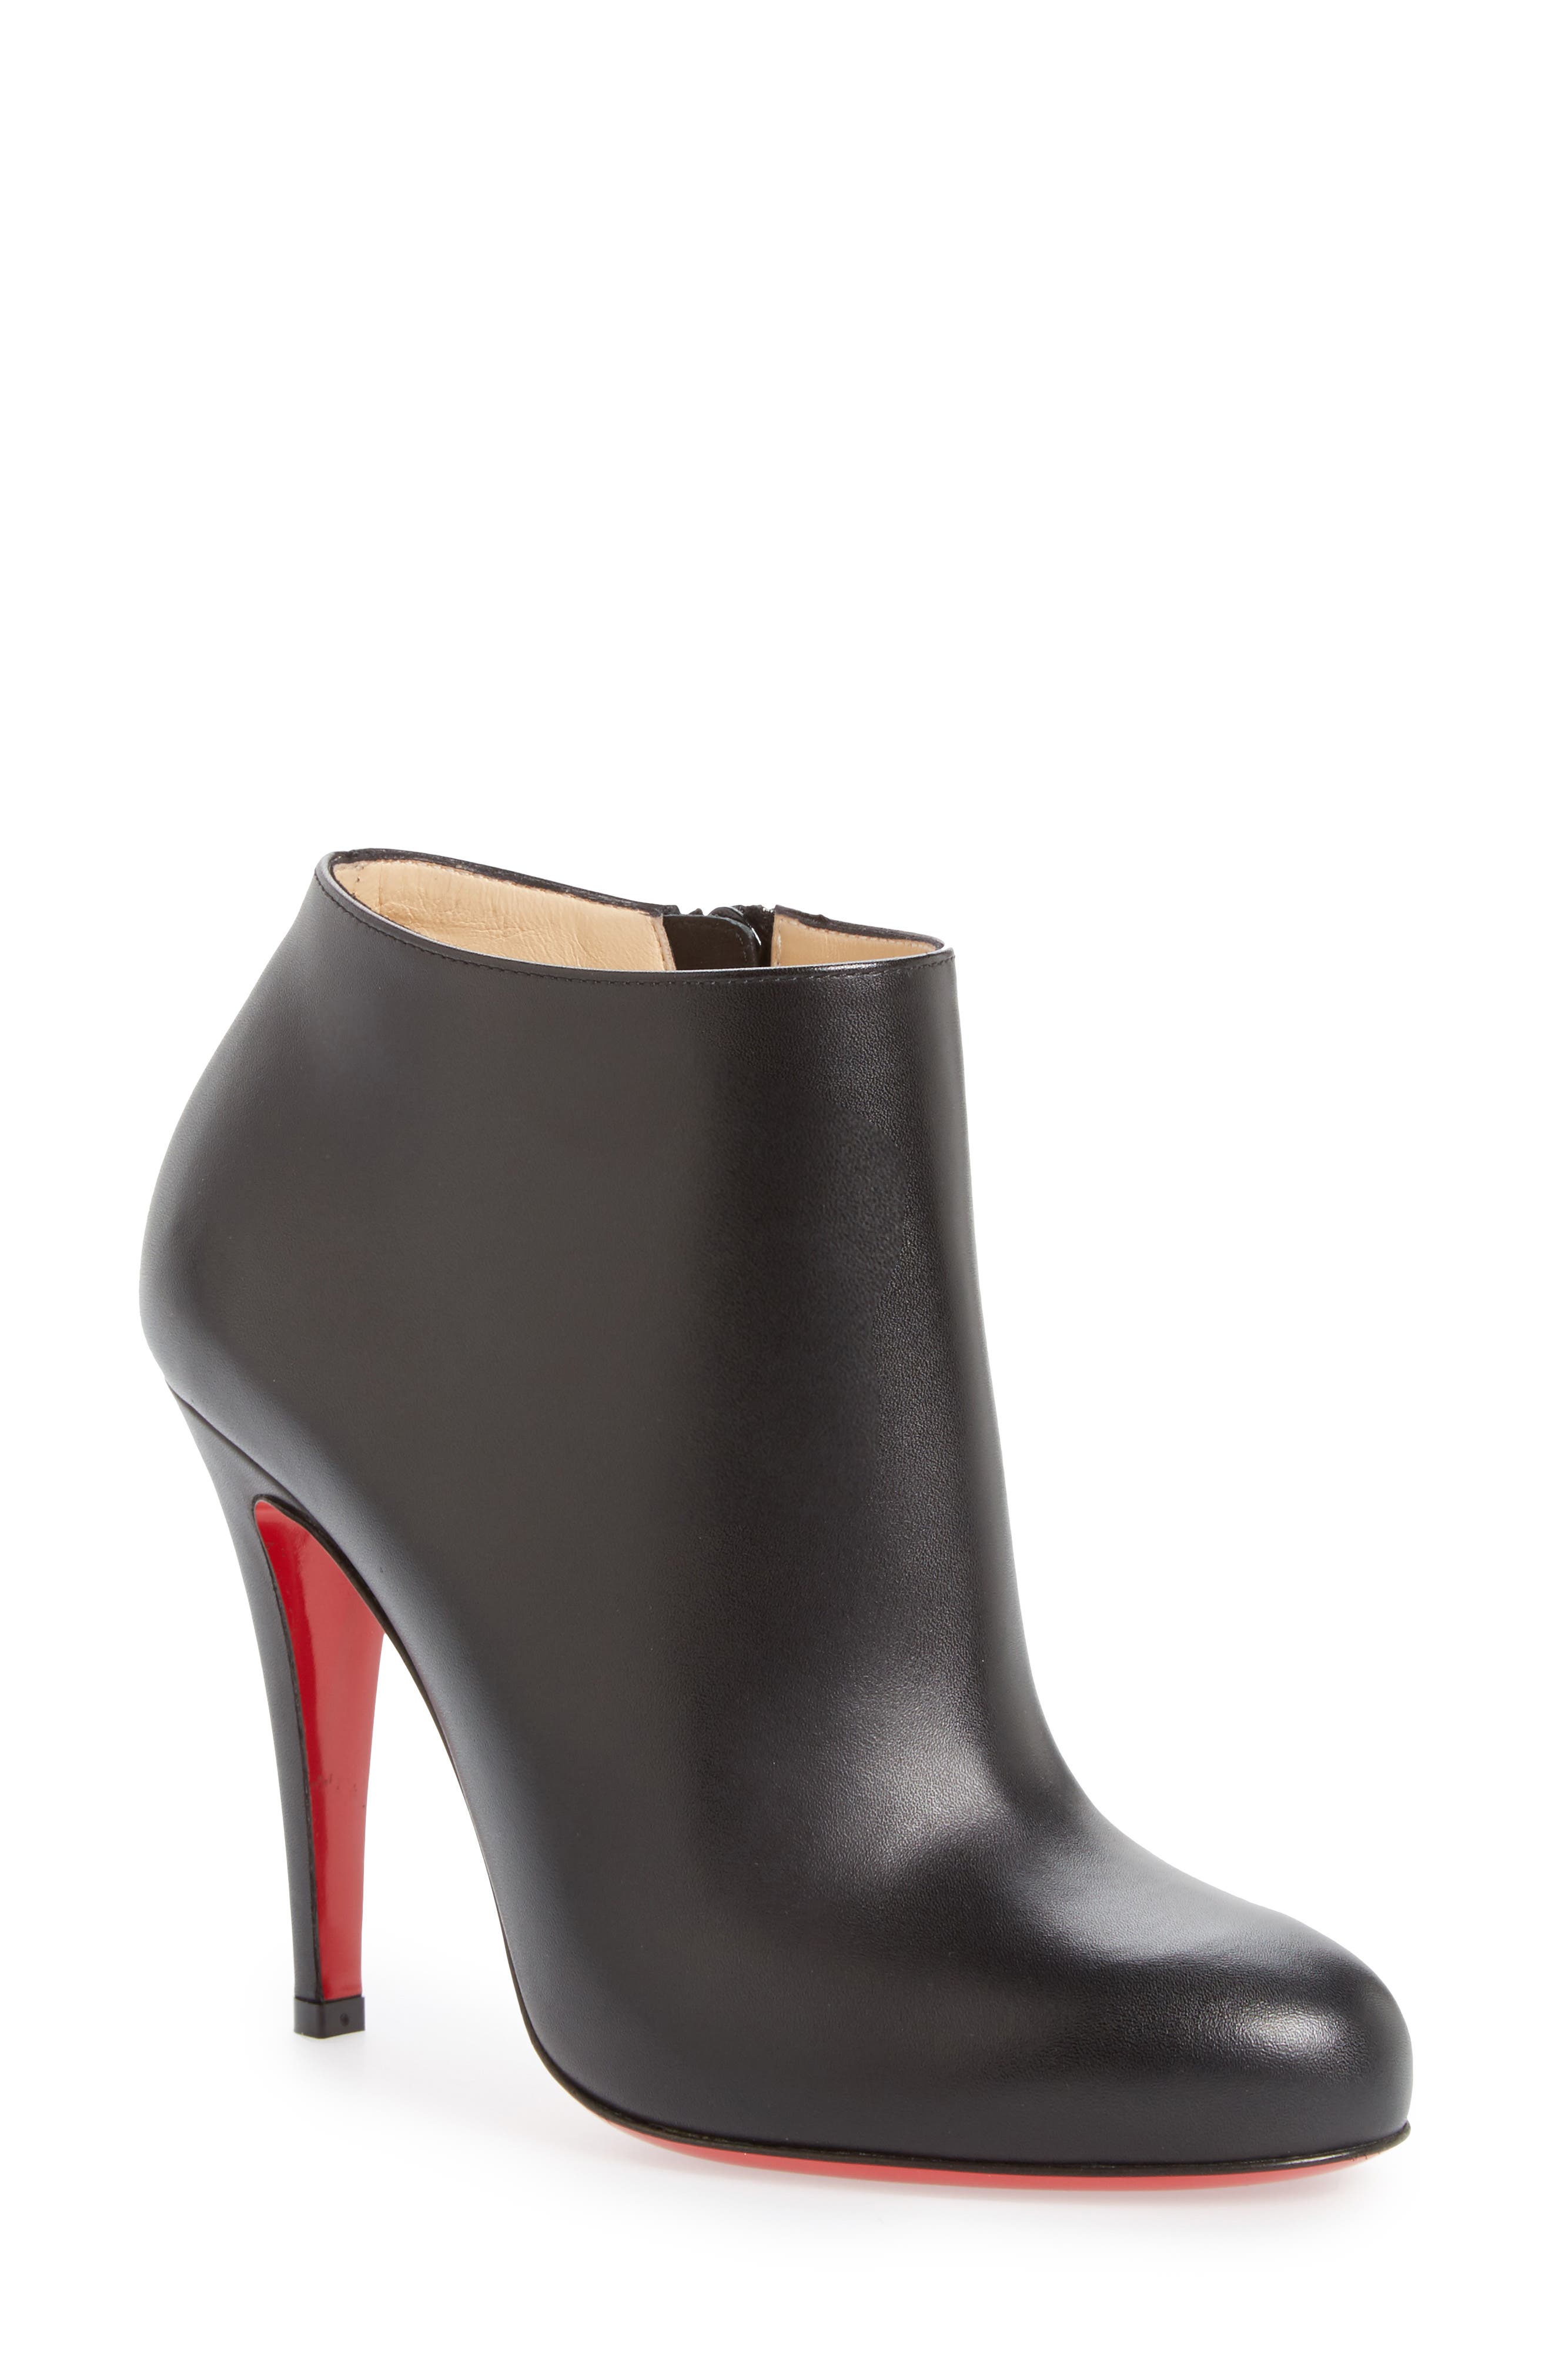 belle round toe bootie christian louboutin